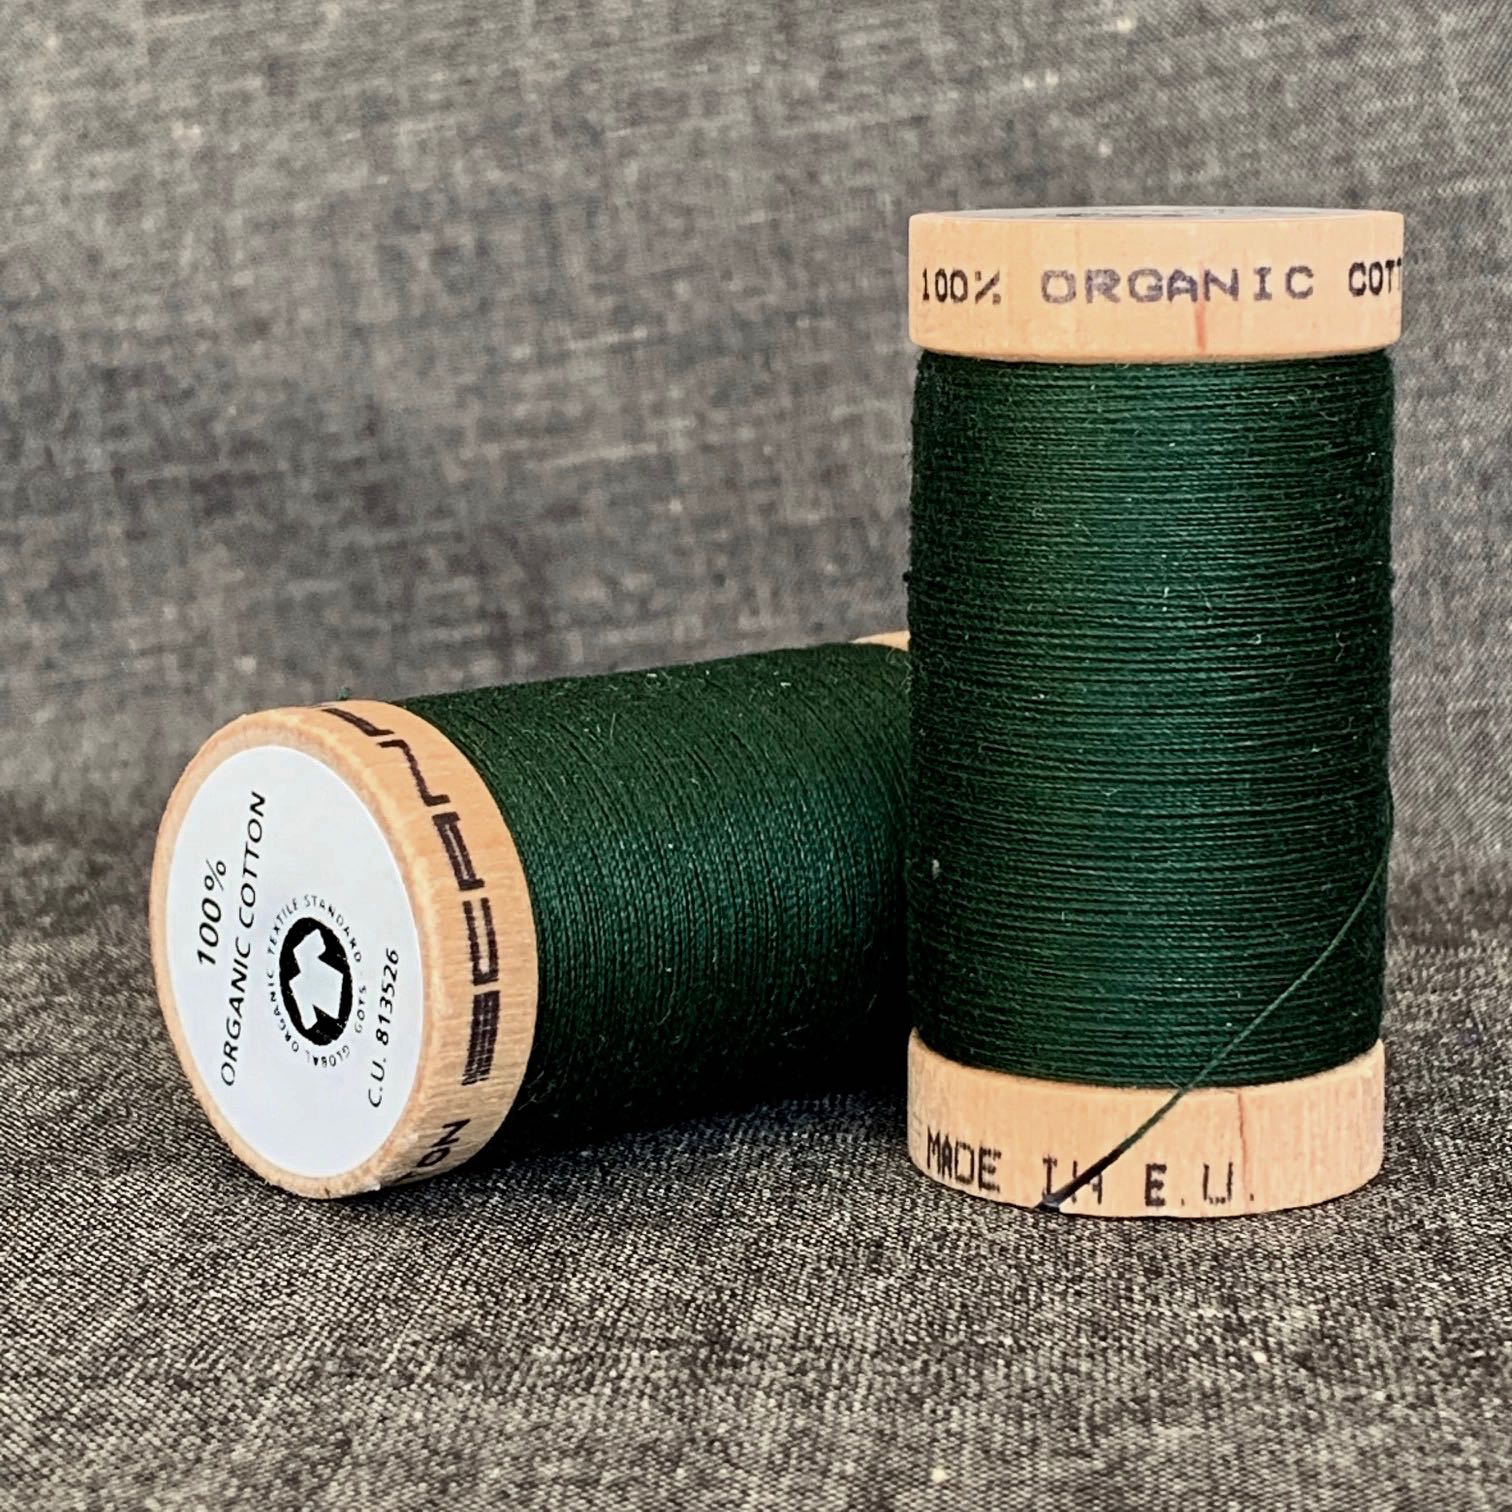 Scanfil Organic Cotton Sewing Thread Forest Green